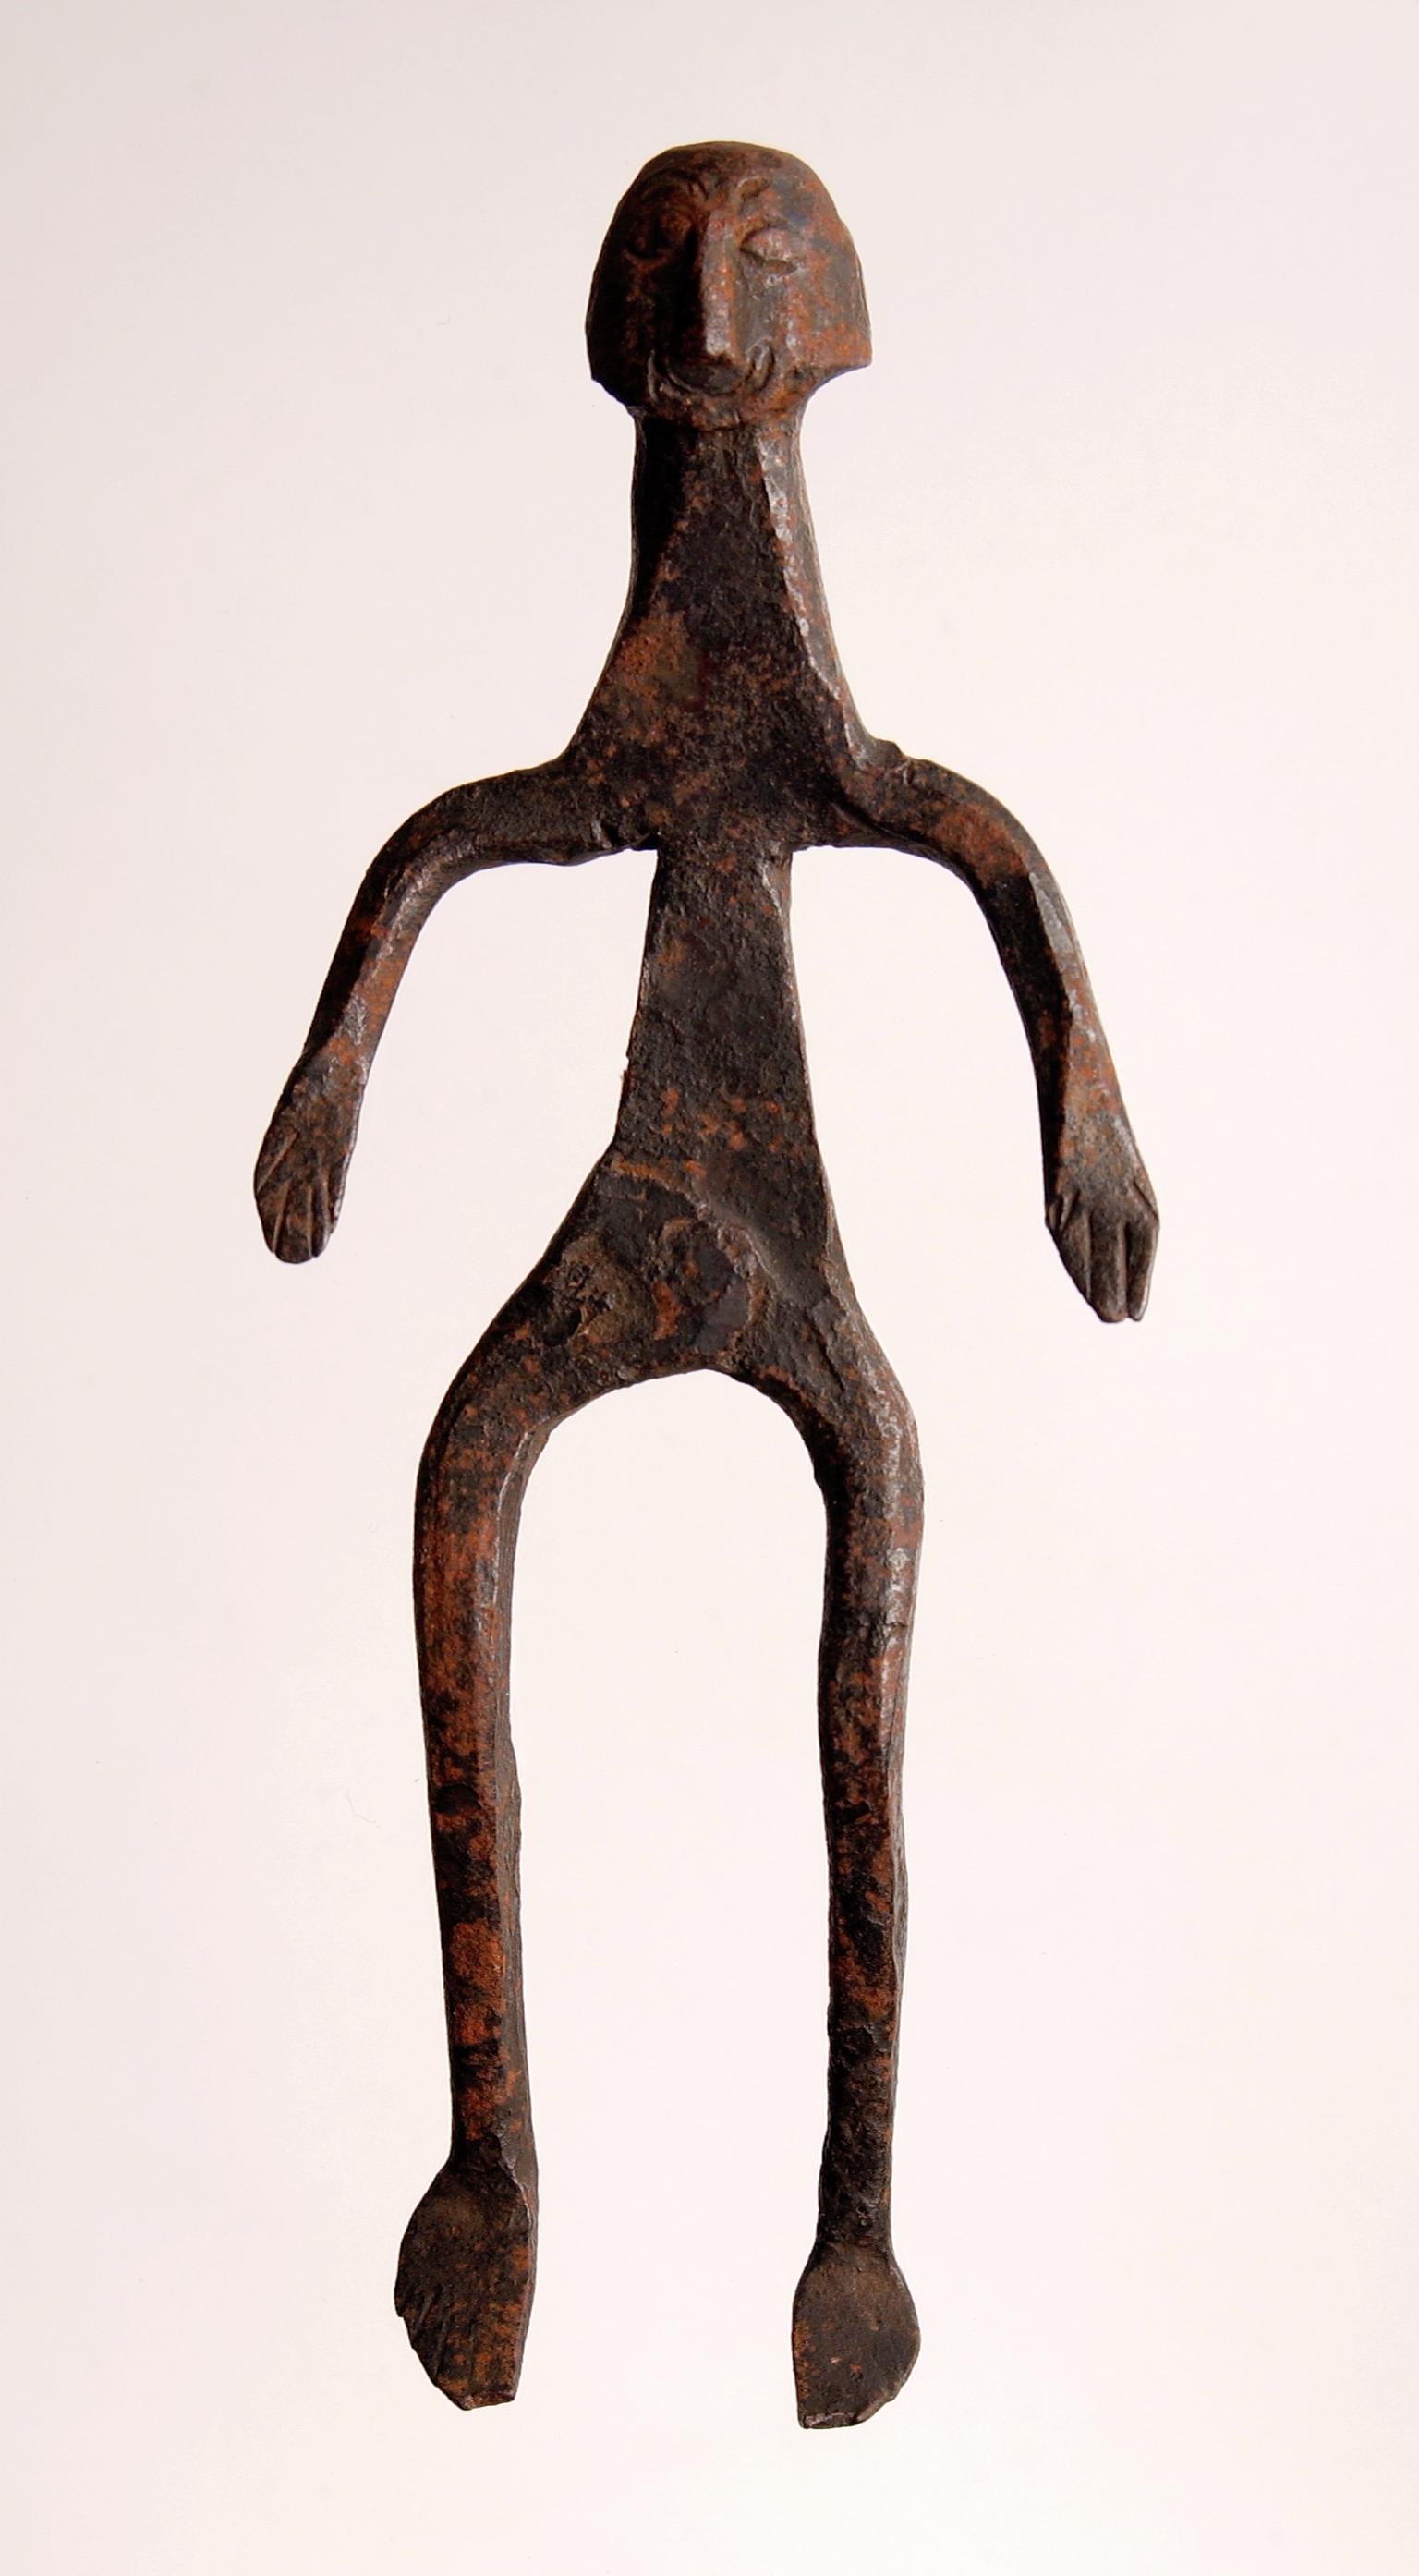 Spirit doll, made completely of iron, from the Congo; made to house the soul on a man's death; resembles a human body with head and face.